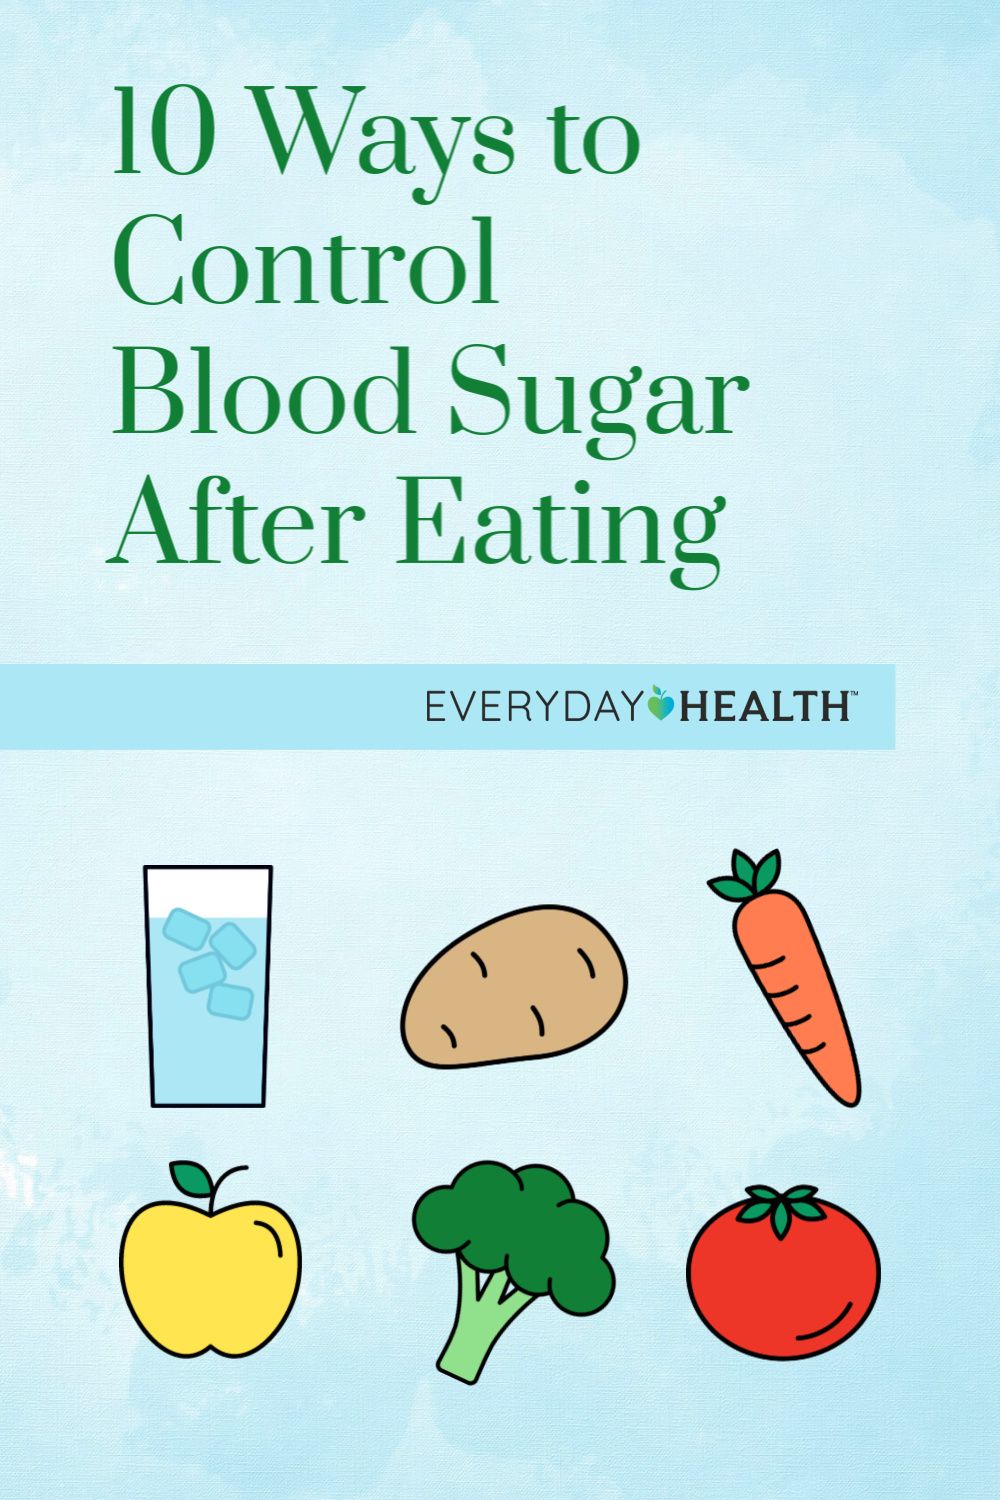 Managing High Blood Sugar: Tips for Effective Control